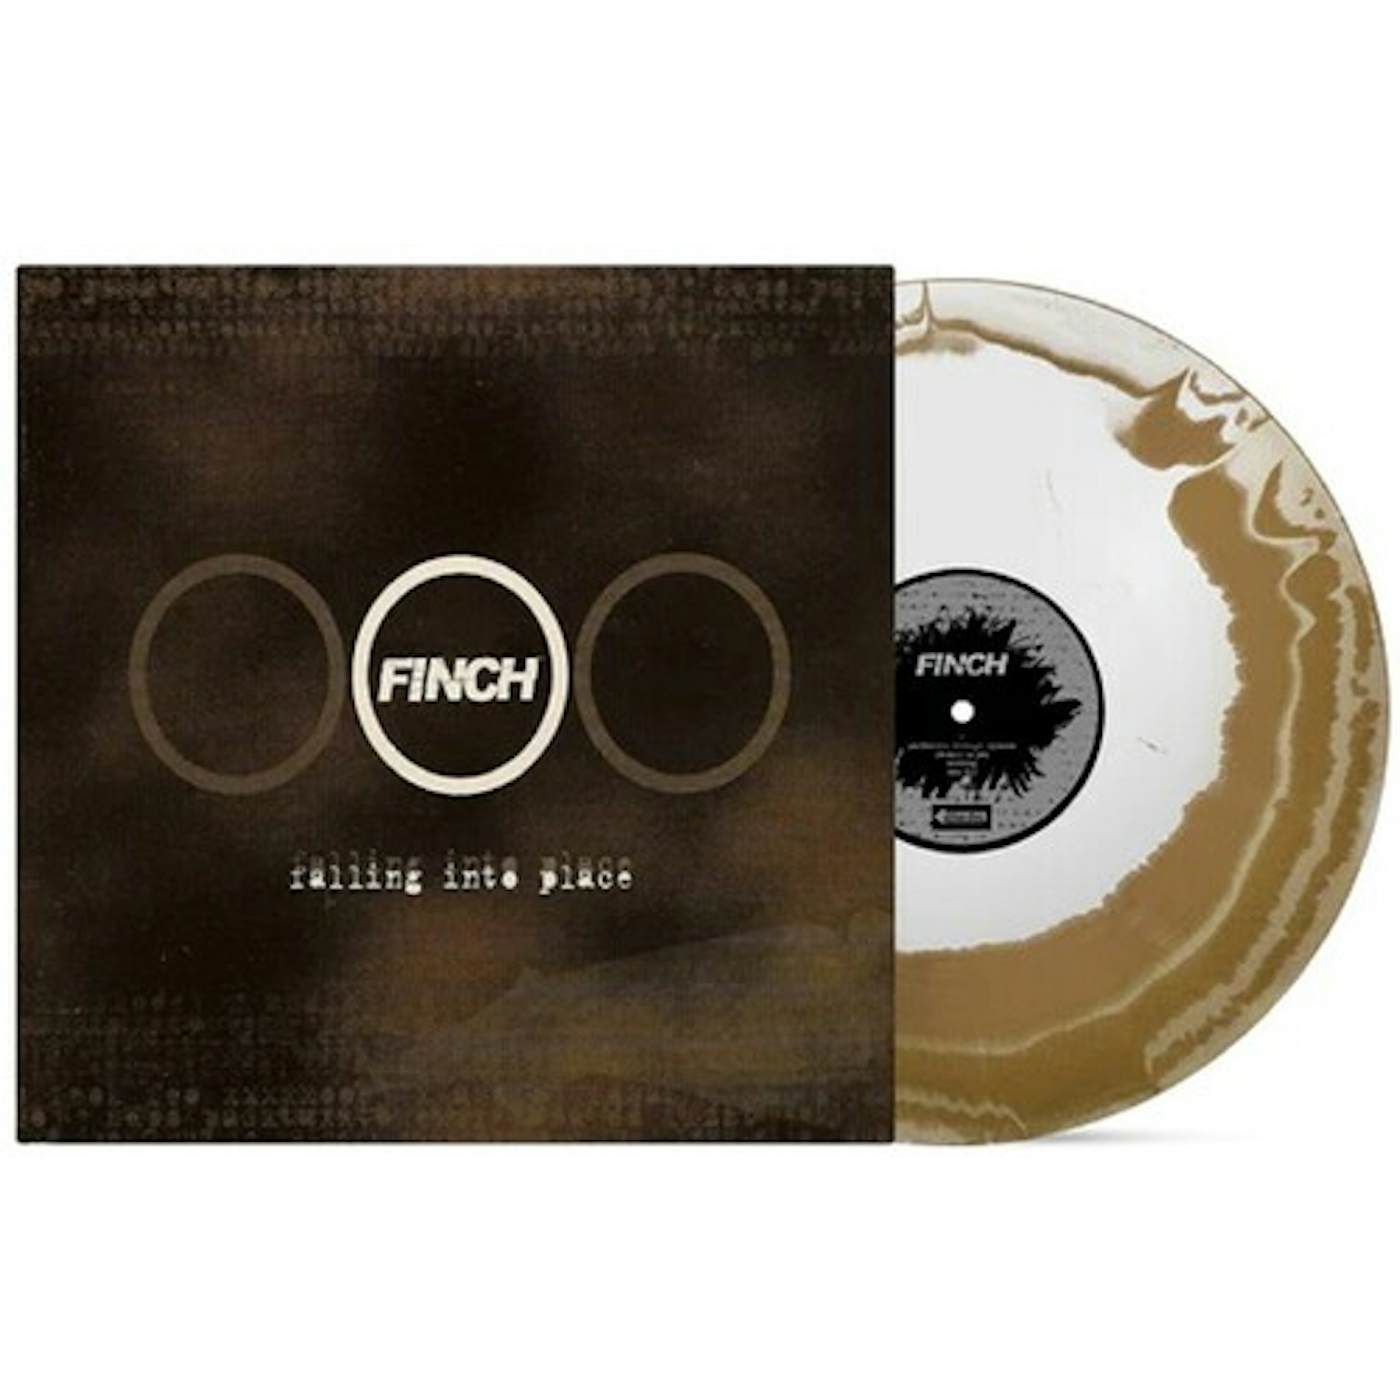 Finch Falling Into Place Vinyl Record